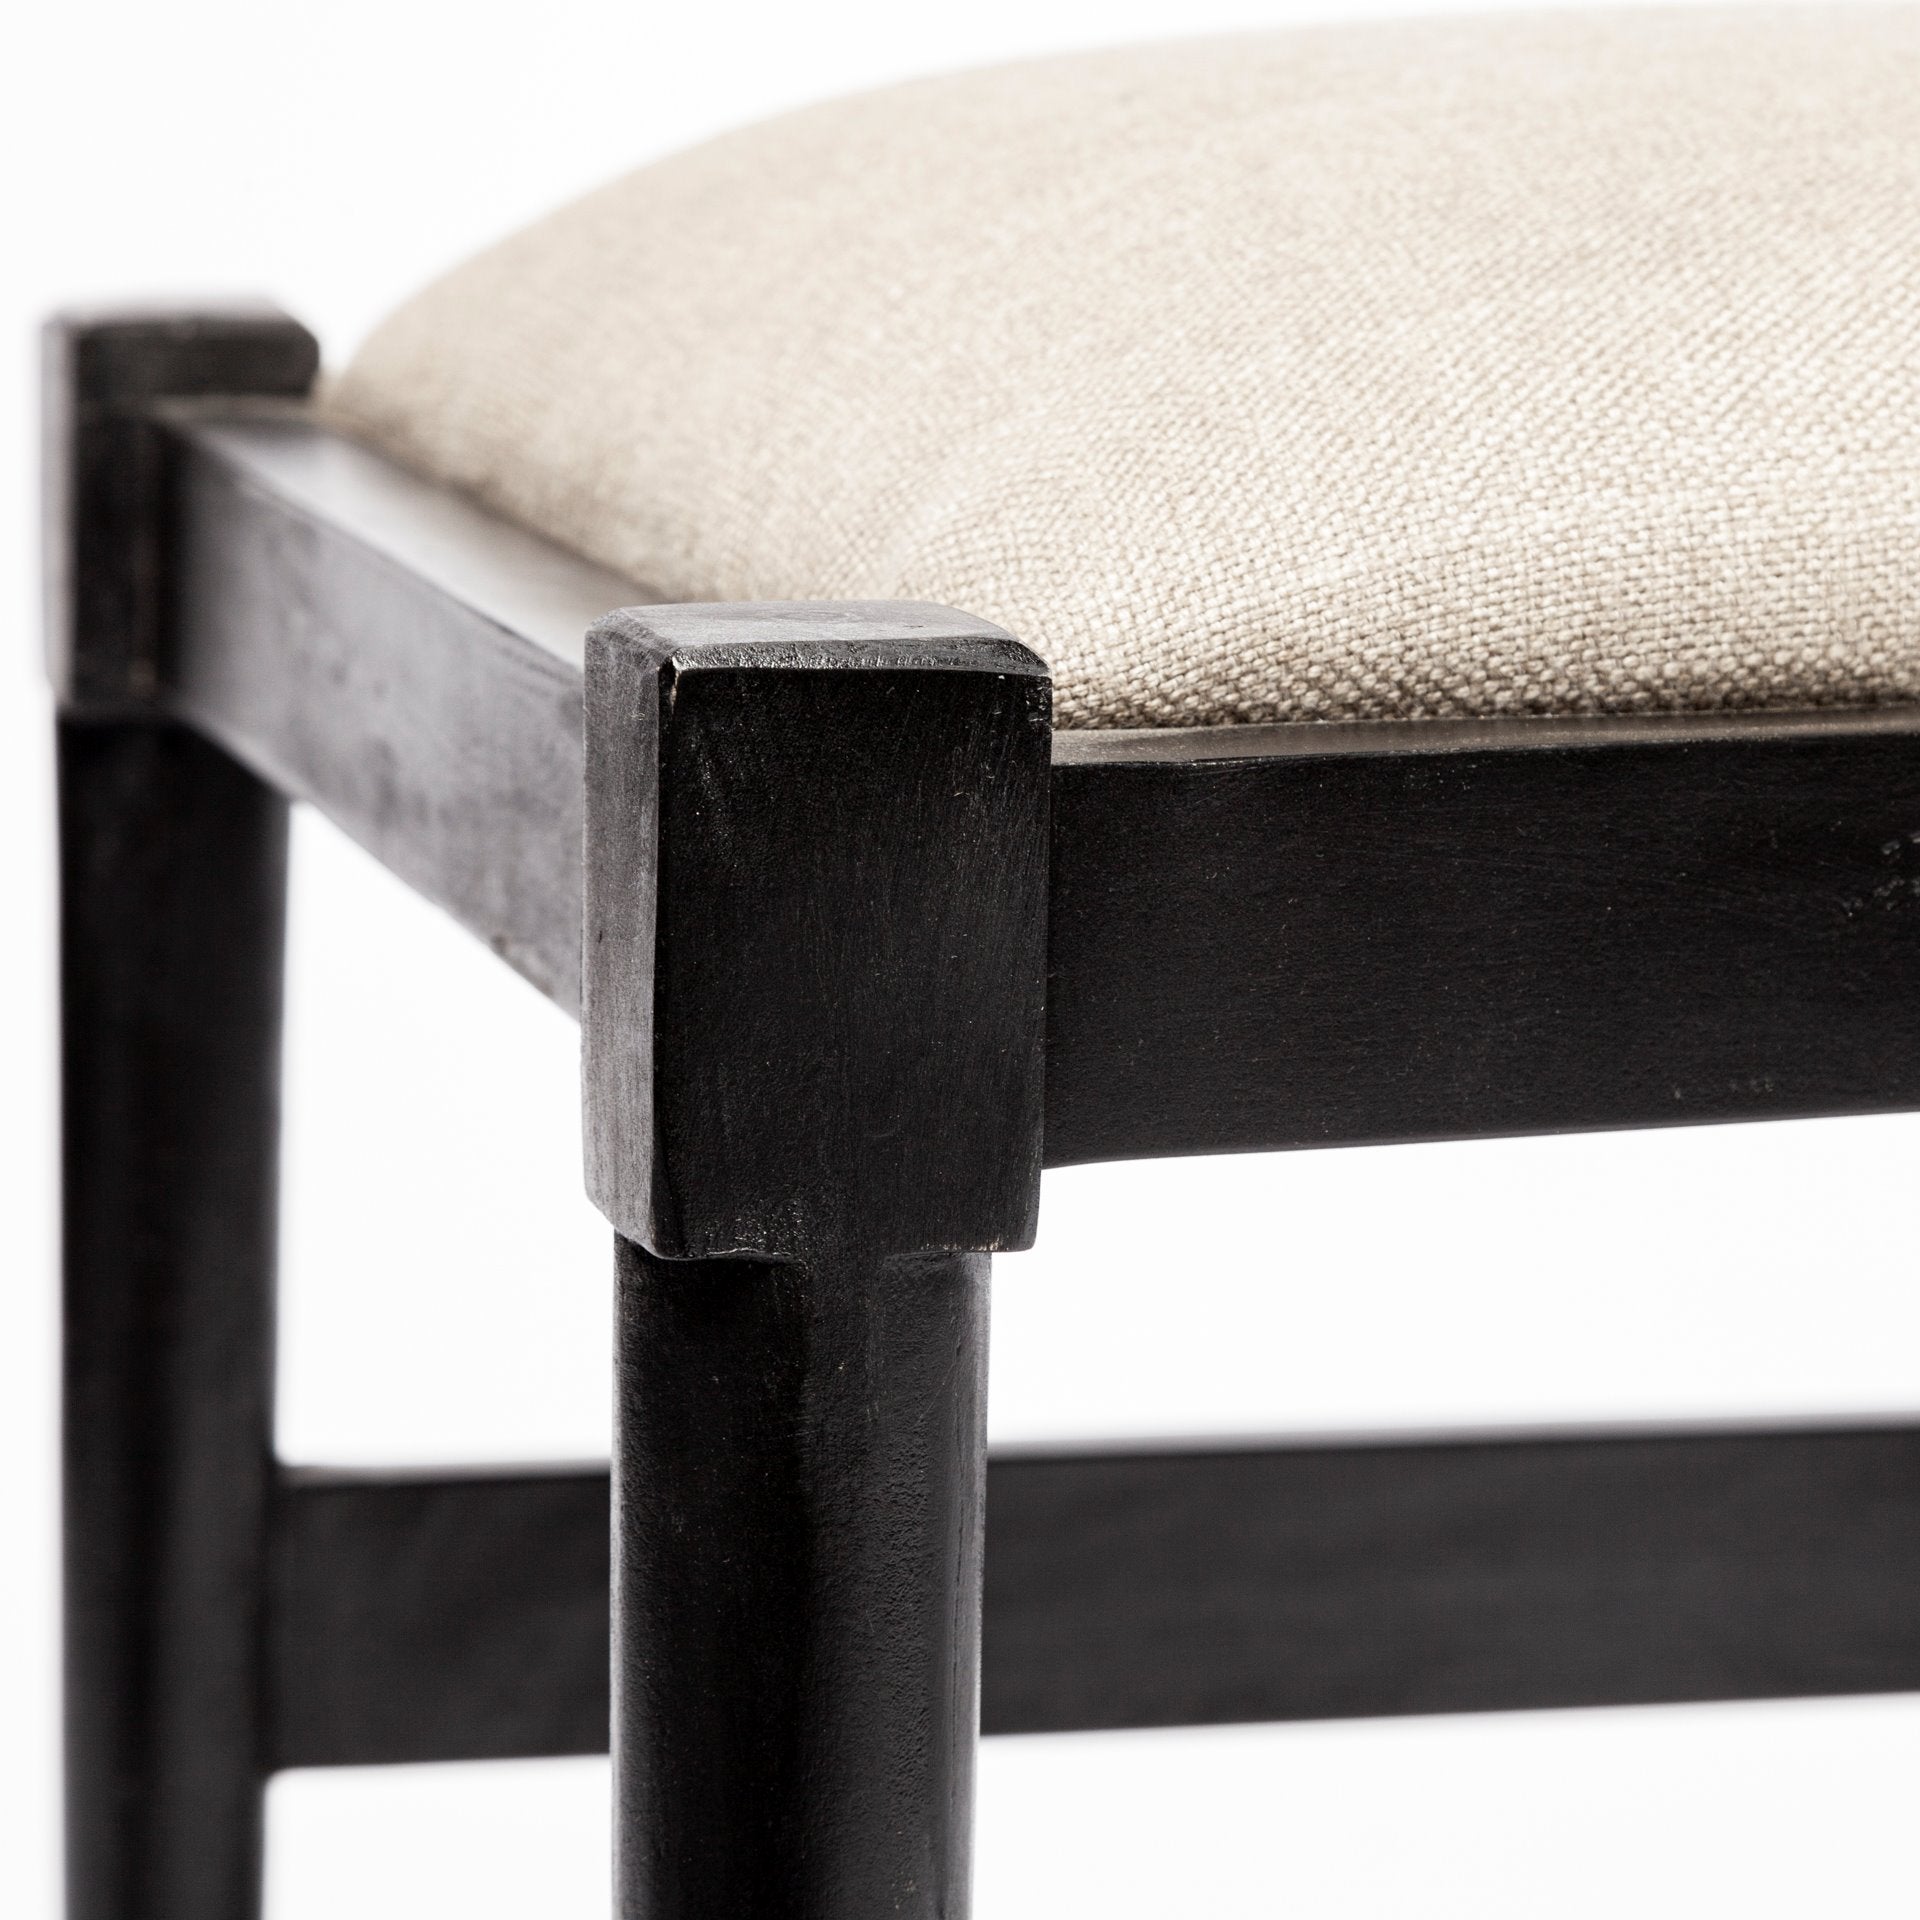 Trixie Dining Chair - Black